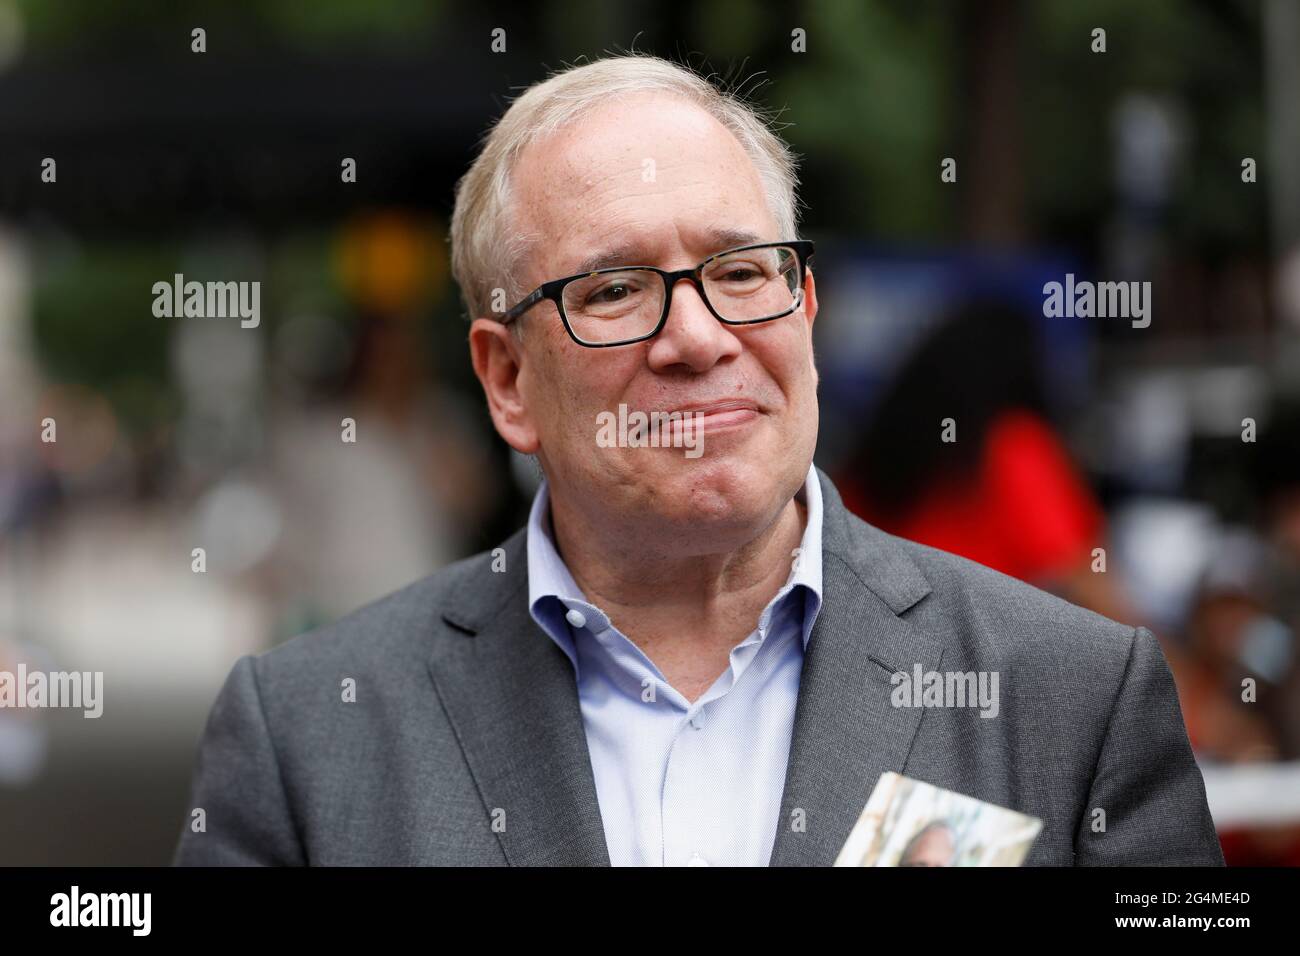 Democratic New York City Mayoral candidate Scott Stringer smiles during the  New York City primary mayoral election, in New York City, U.S., June 22,  2021. REUTERS/Andrew Kelly Stock Photo - Alamy